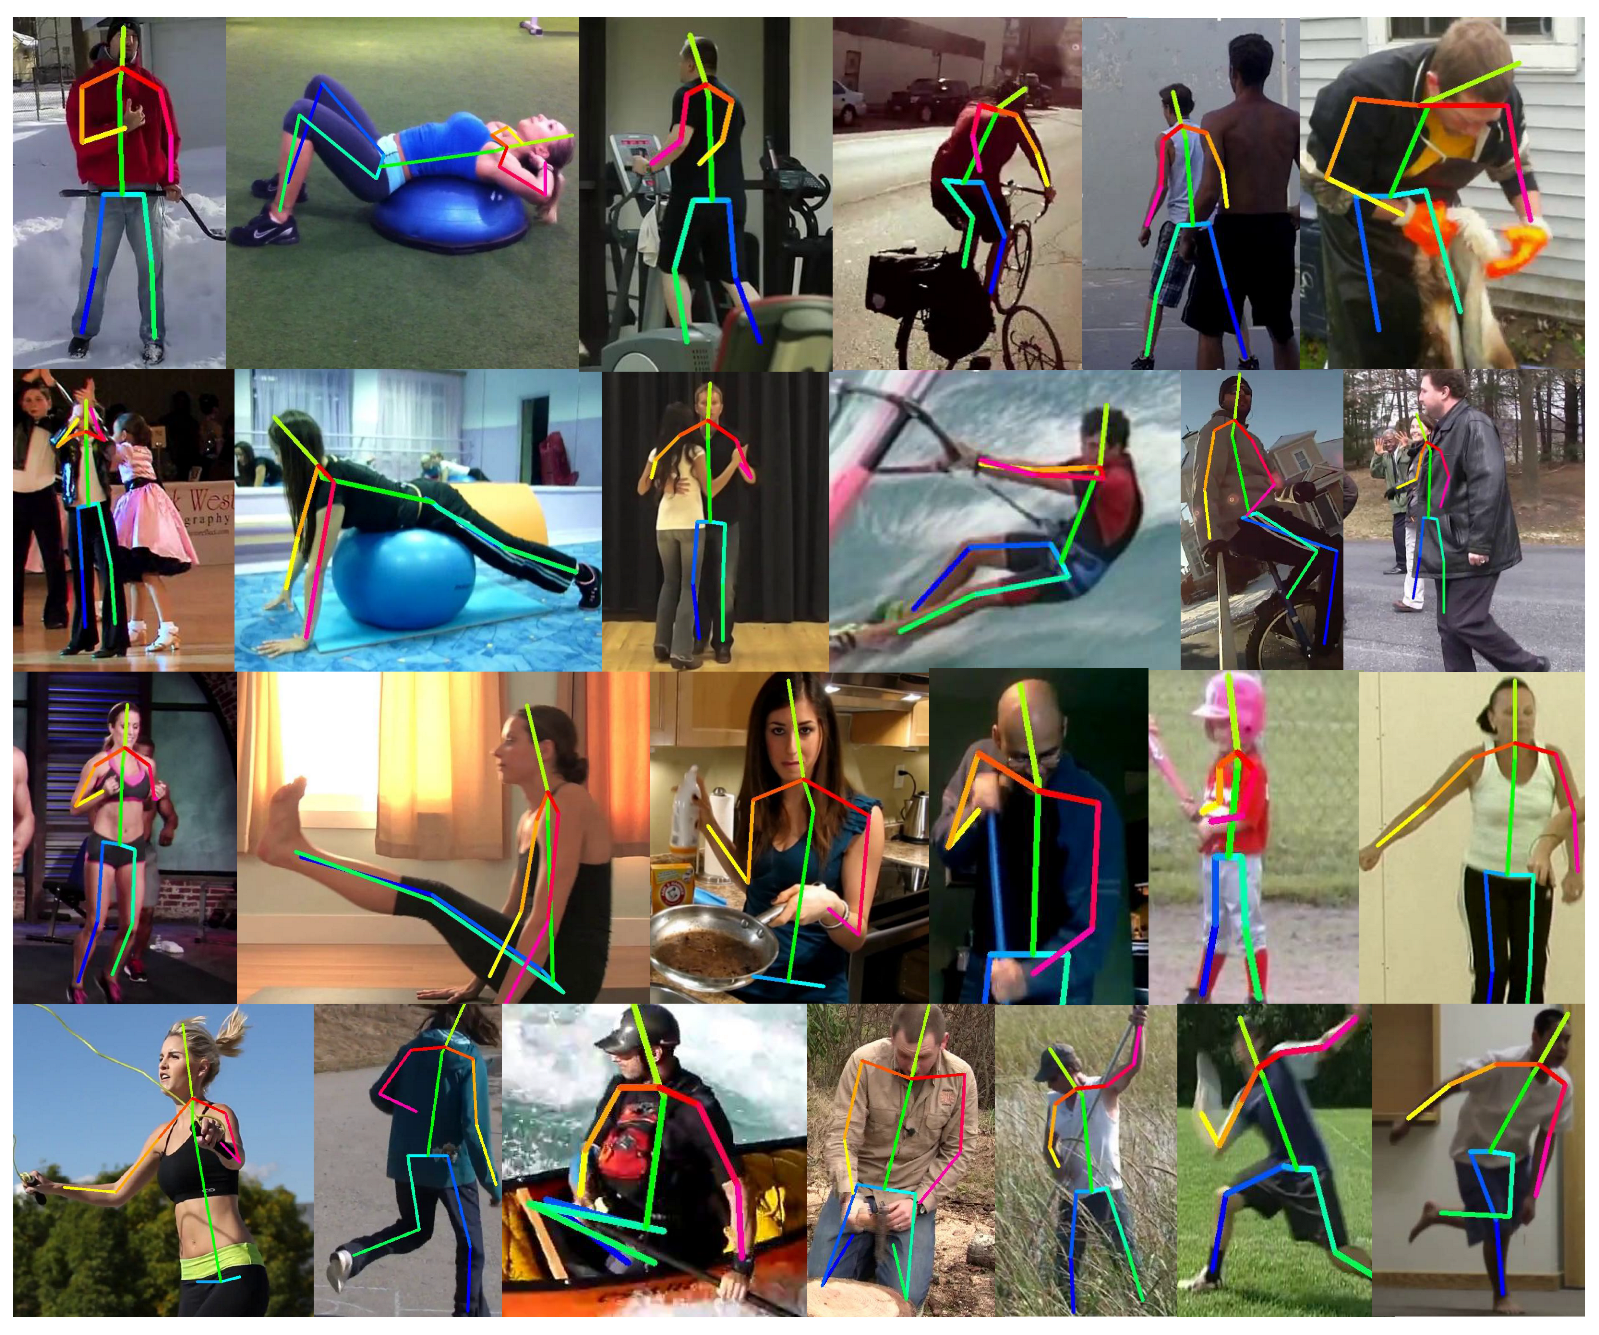 2D/3D Human Pose Estimation using Computer Vision and Machine Learning |  Upwork